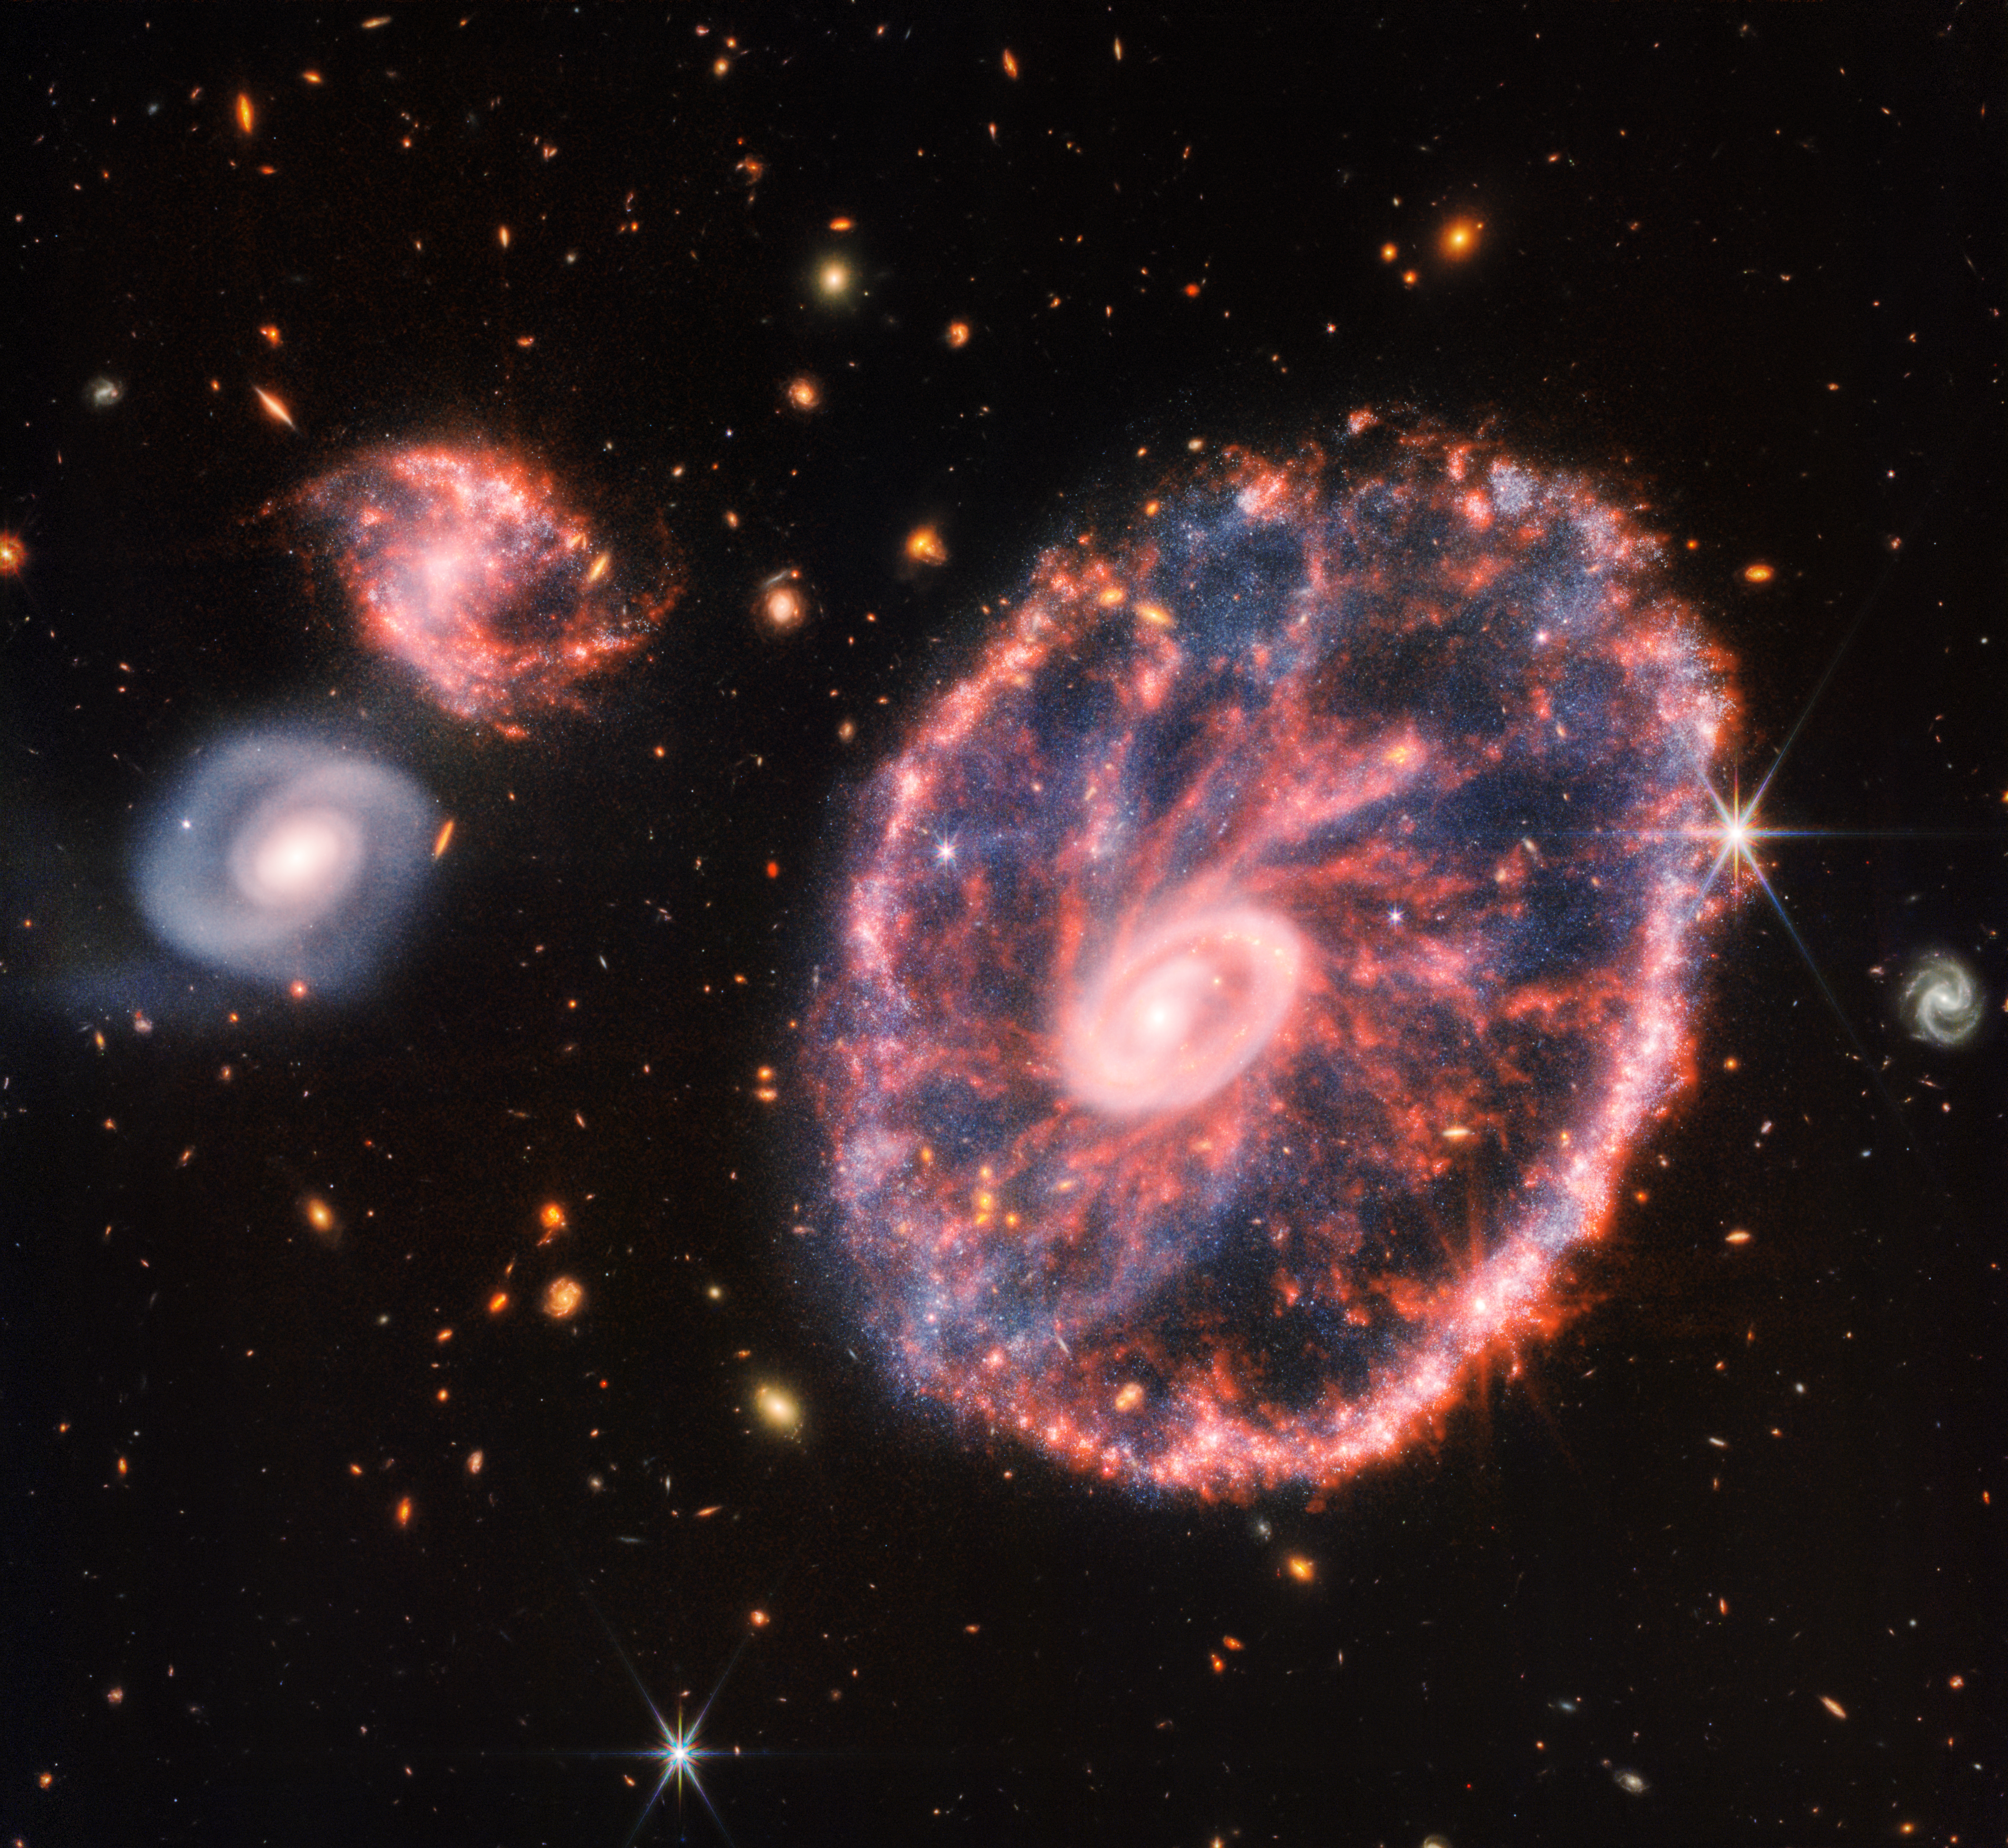 This image of the Cartwheel and its companion galaxies is a composite from Webb’s Near-Infrared Camera (NIRCam) and Mid-Infrared Instrument (MIRI), which reveals details that are difficult to see in the individual images alone. This galaxy formed as the result of a high-speed collision that occurred about 400 million years ago. The Cartwheel is composed of two rings, a bright inner ring and a colorful outer ring. Both rings expand outward from the center of the collision like shockwaves. Image: NASA, ESA, CSA, STScI, Webb ERO Production Team